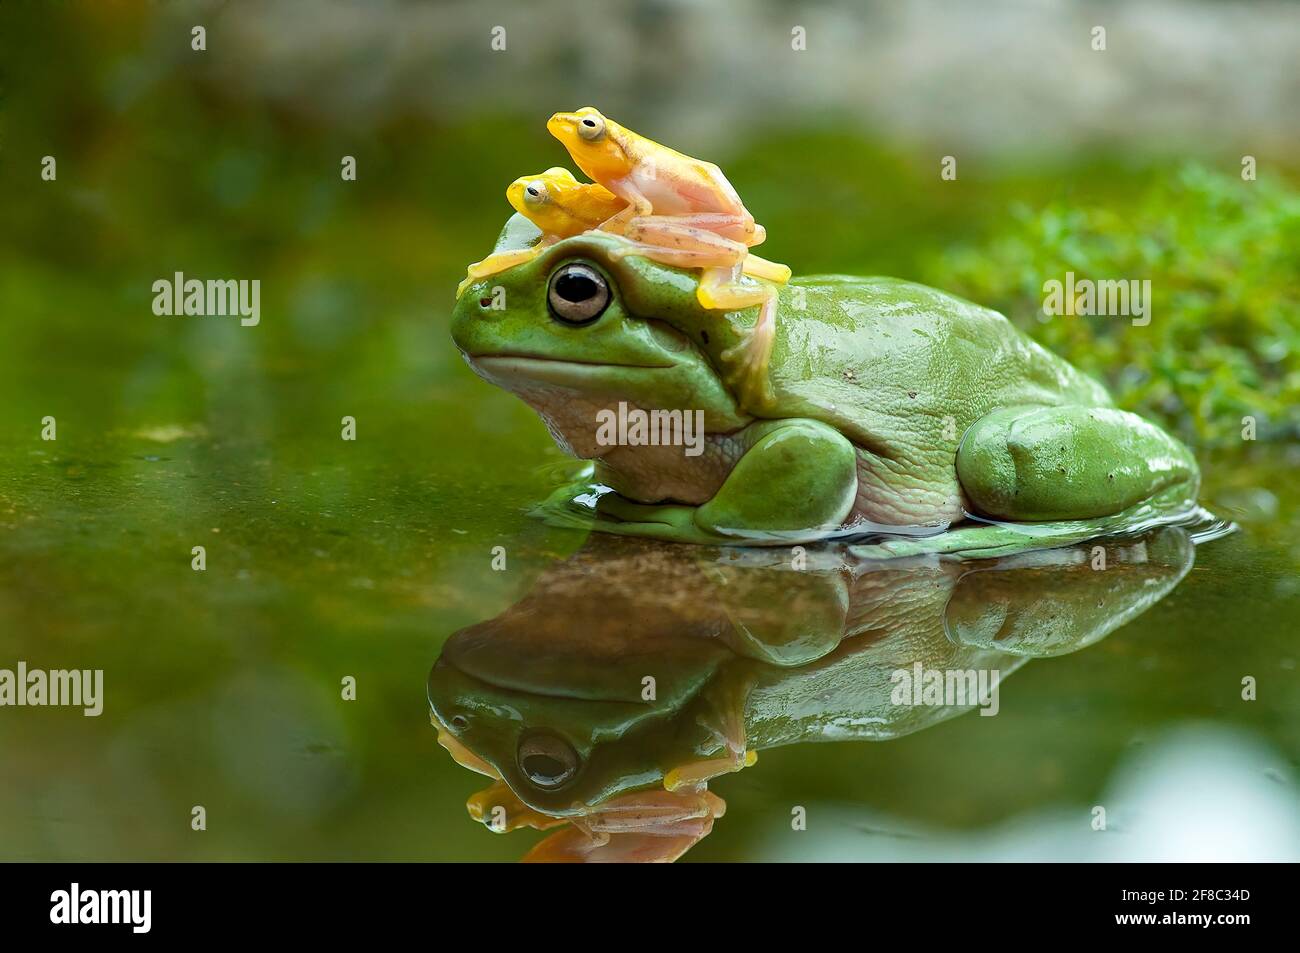 https://c8.alamy.com/comp/2F8C34D/padang-indonesia-the-baby-frogs-perched-on-top-of-the-dumpy-tree-frog-hilarious-pictures-show-that-social-distancing-rules-do-not-apply-to-frogs-as-2F8C34D.jpg